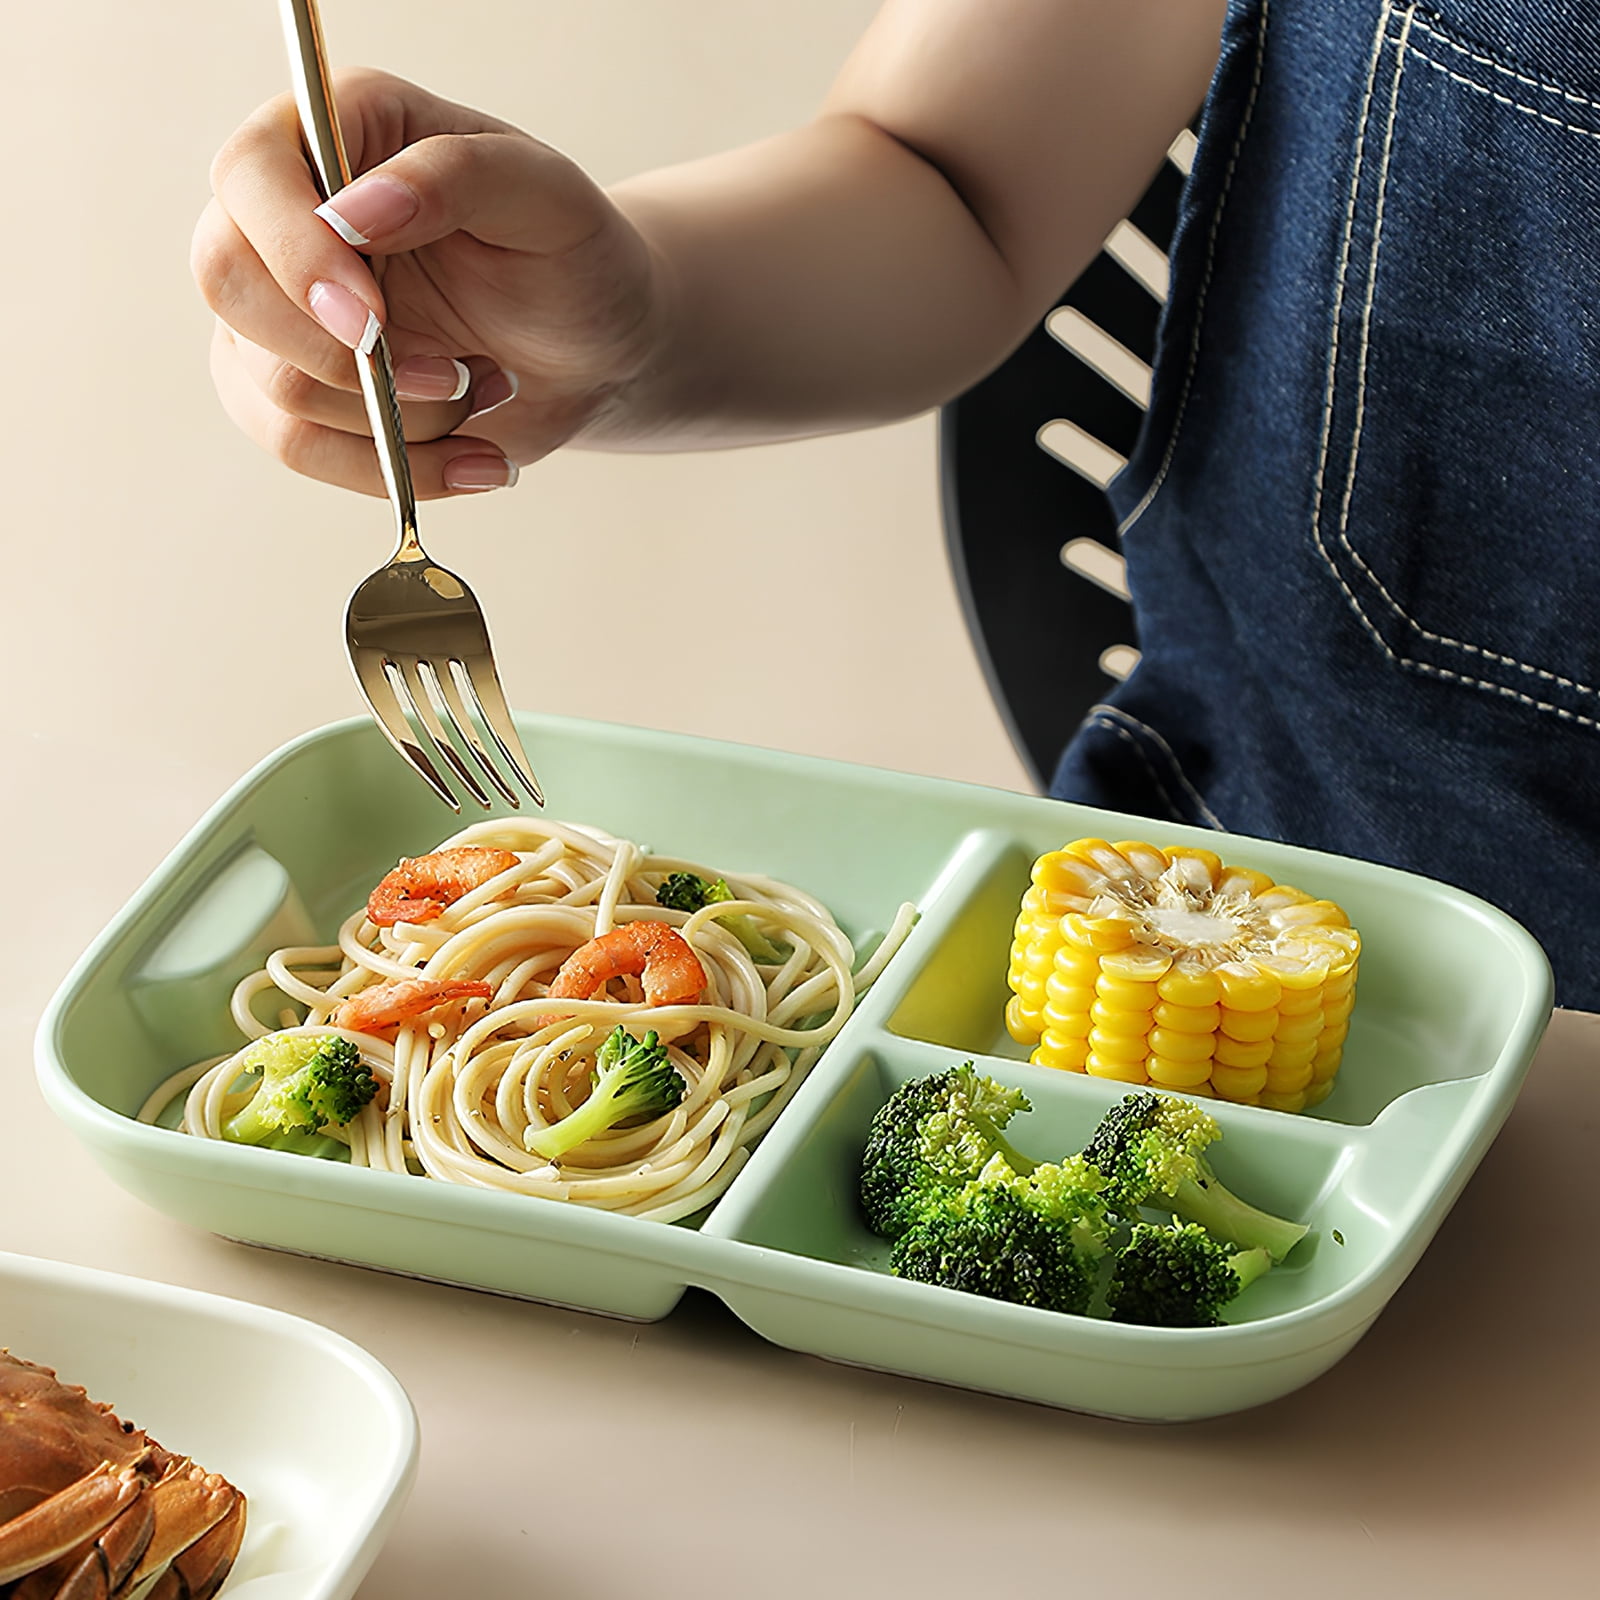 Best Deal for UPKOCH Divided Plates with Dividers Ceramic Lunch Trays